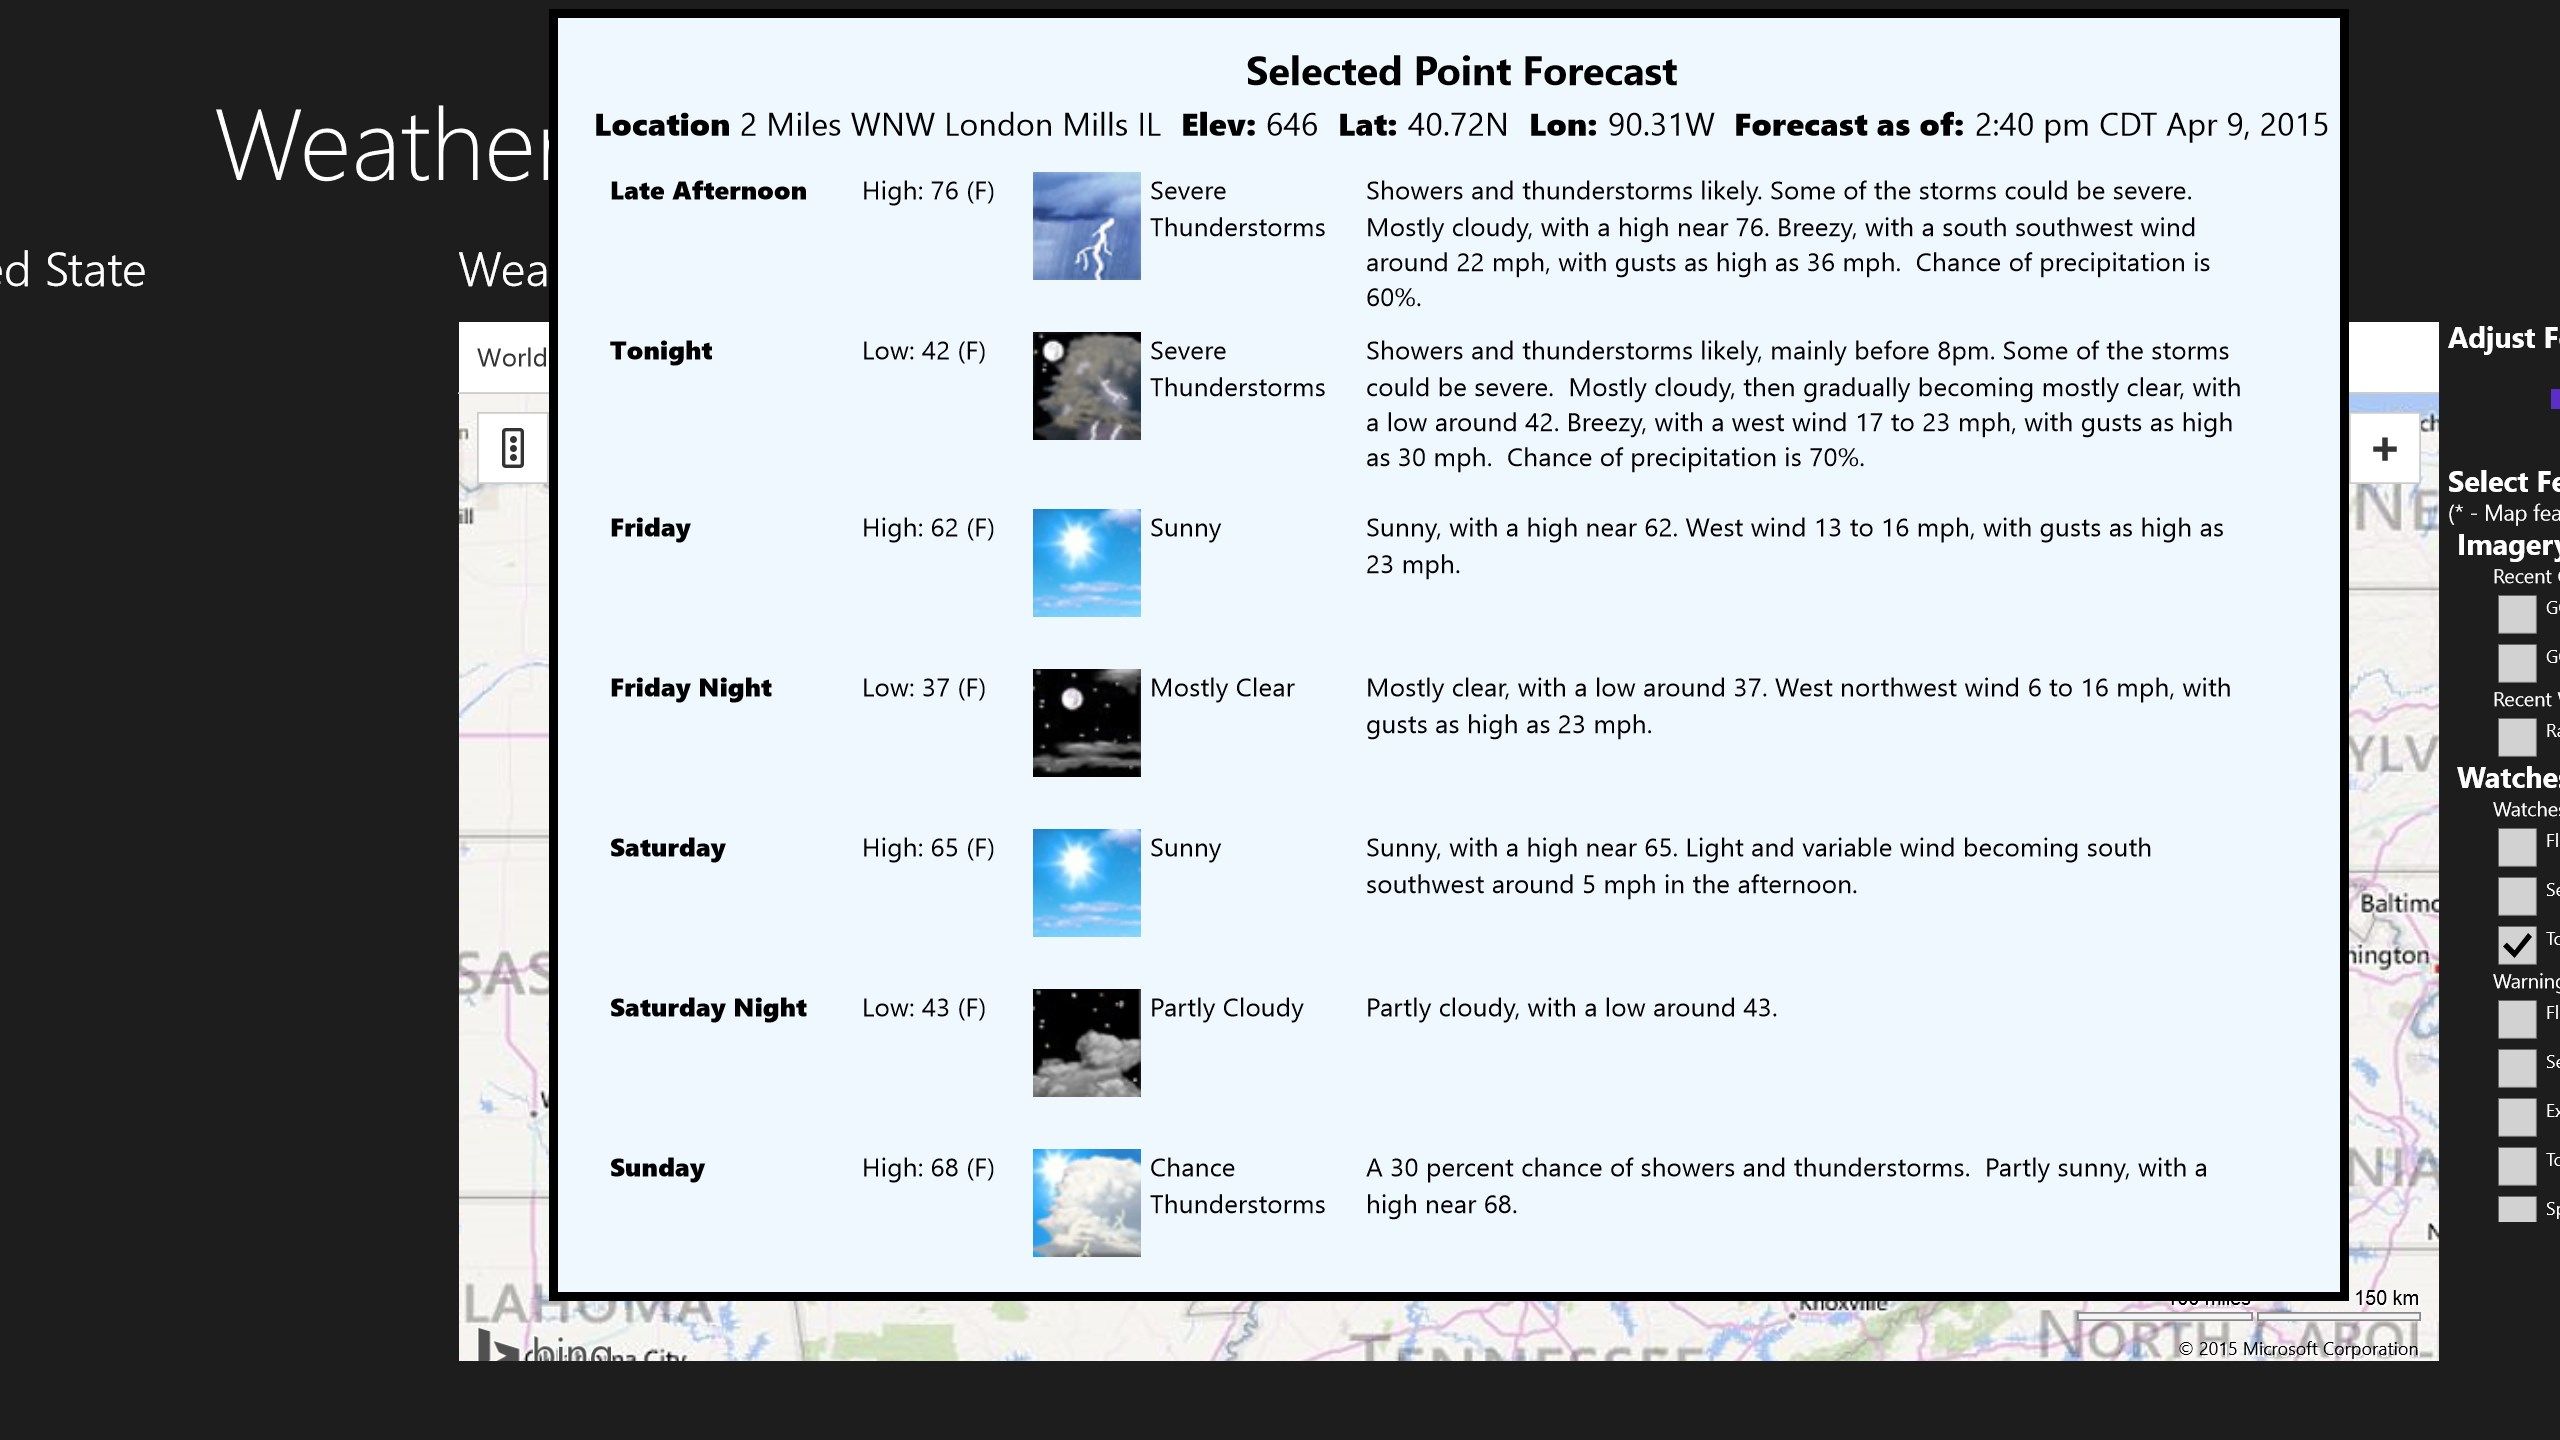 Right-click on the map to obtain a 'point-forecast'.